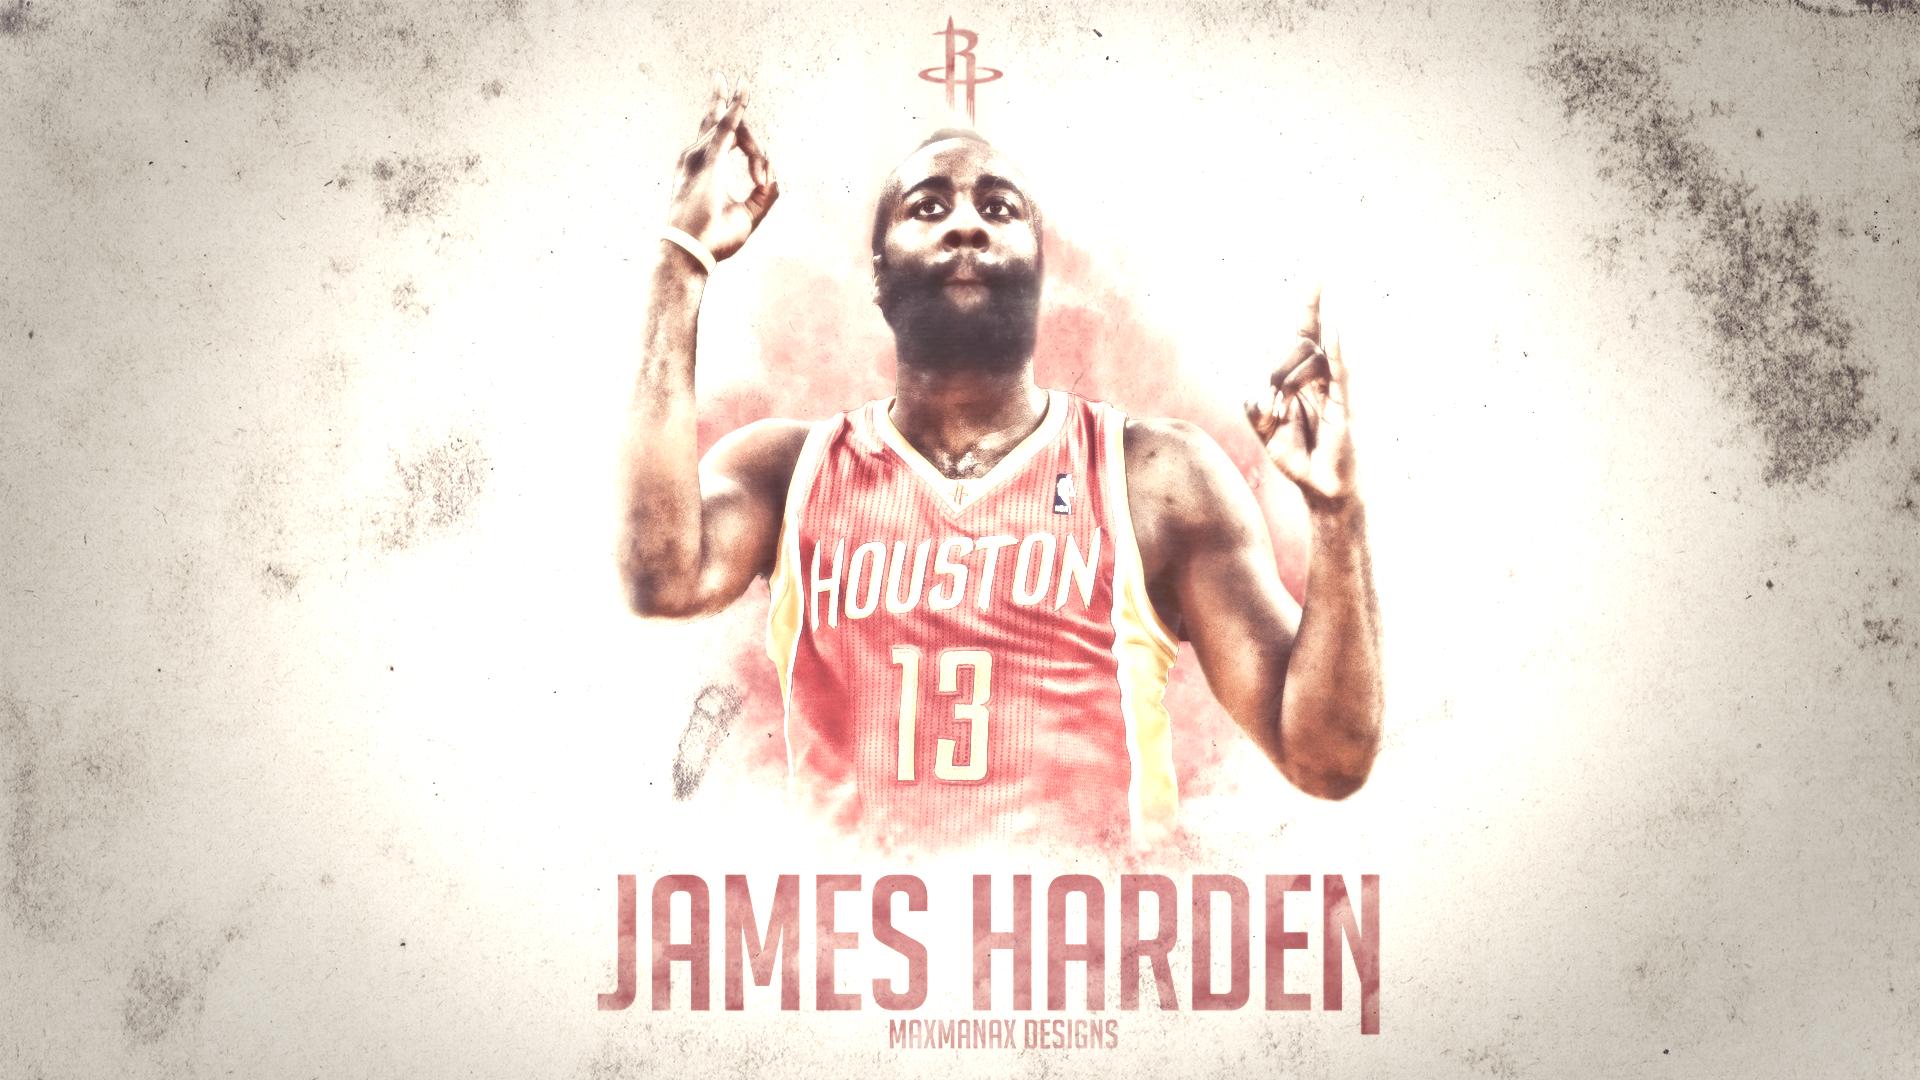 James Harden HD Wallpapers - HD Wallpapers Backgrounds of Your Choice